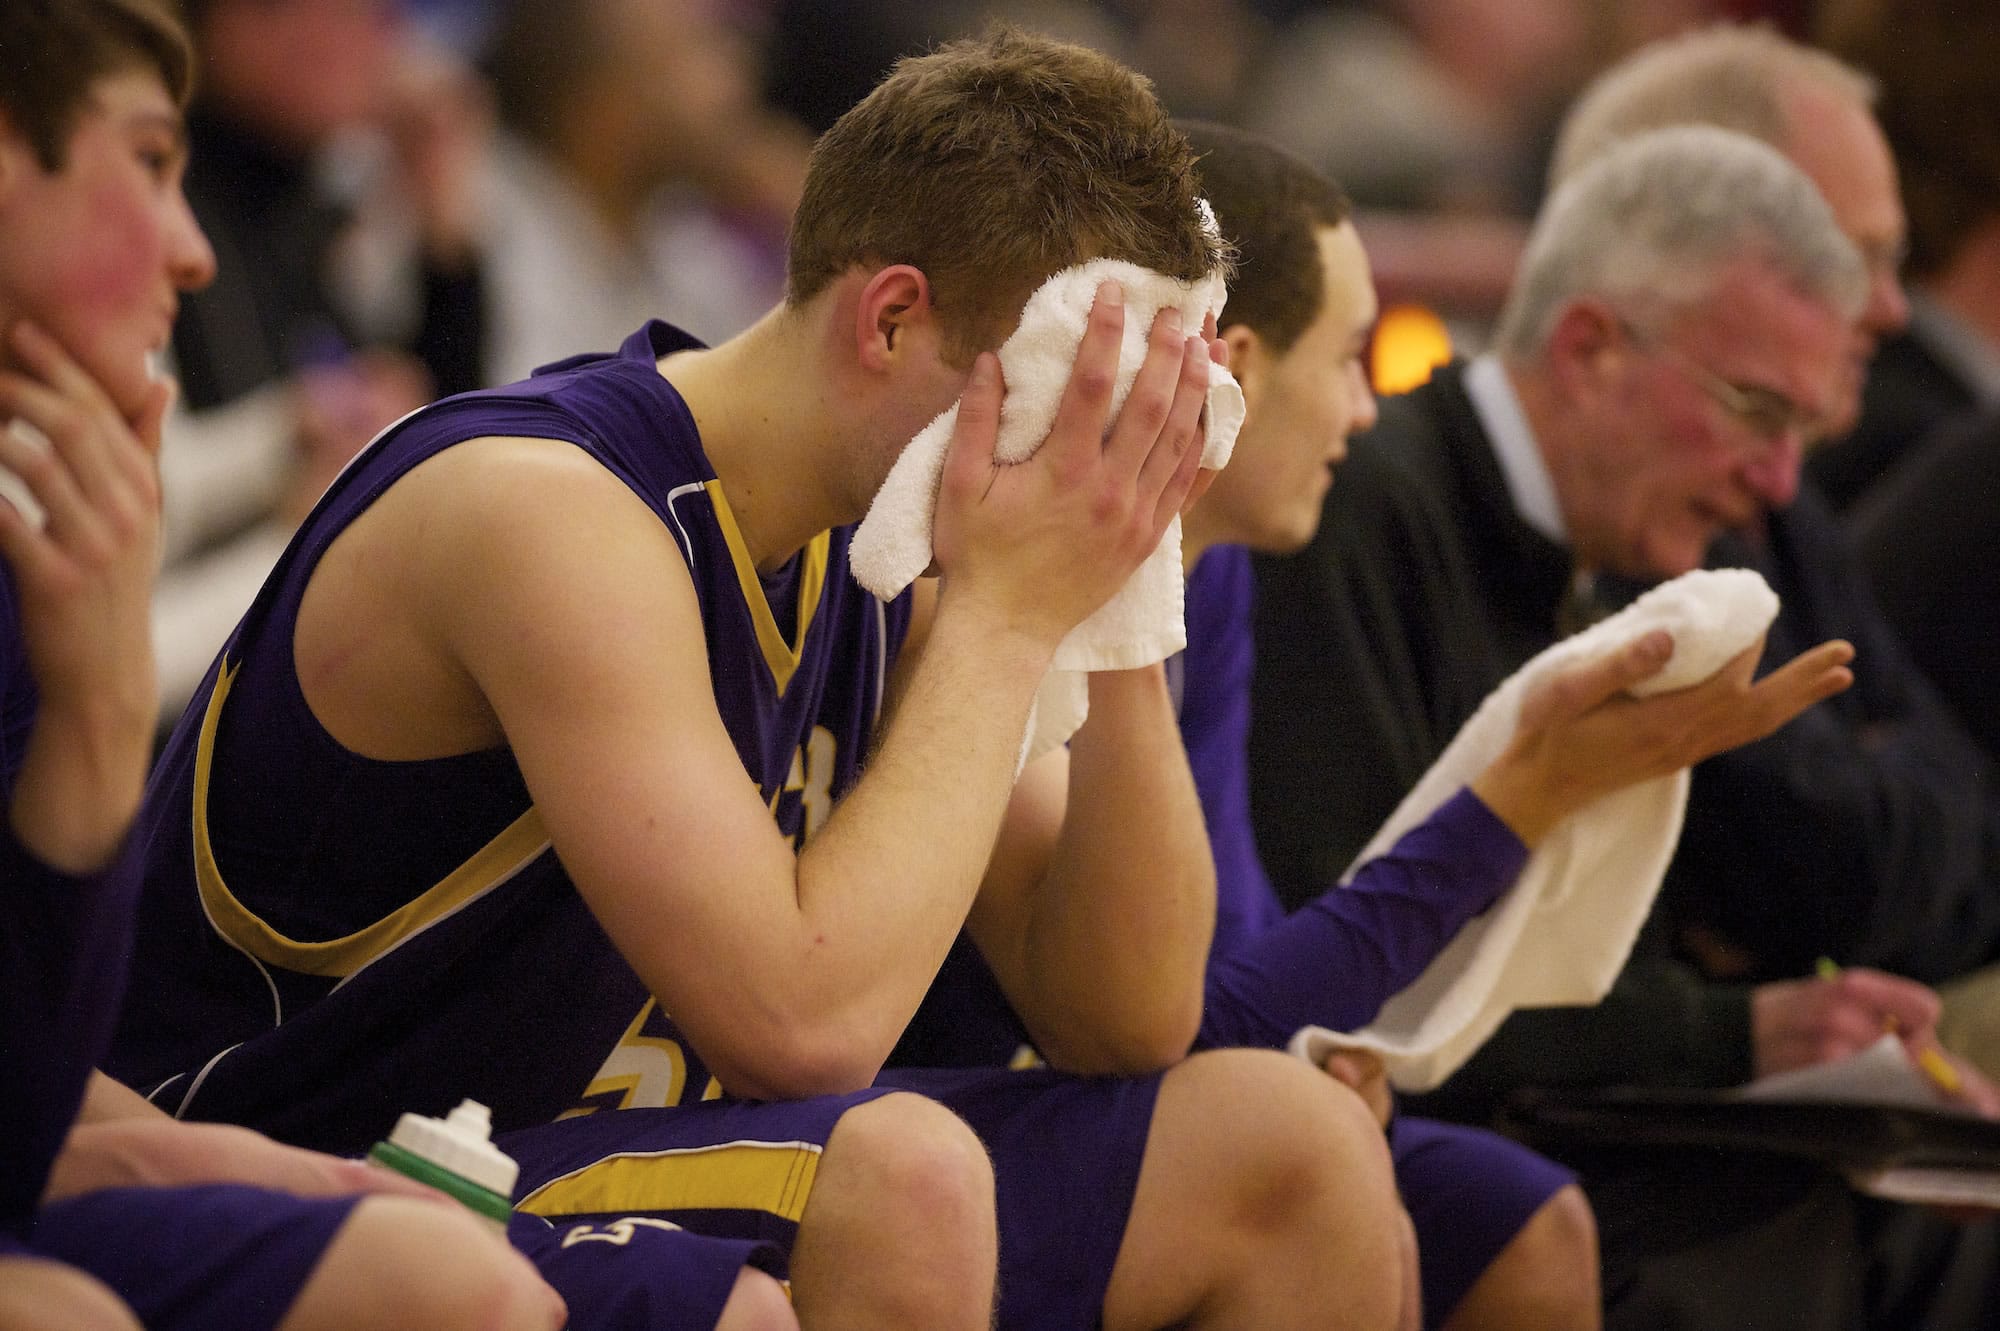 Columbia River's Isaiah Smith buries his head in a towel late in the fourth quarter as Lincoln High School goes on to beat Columbian River 55-35.